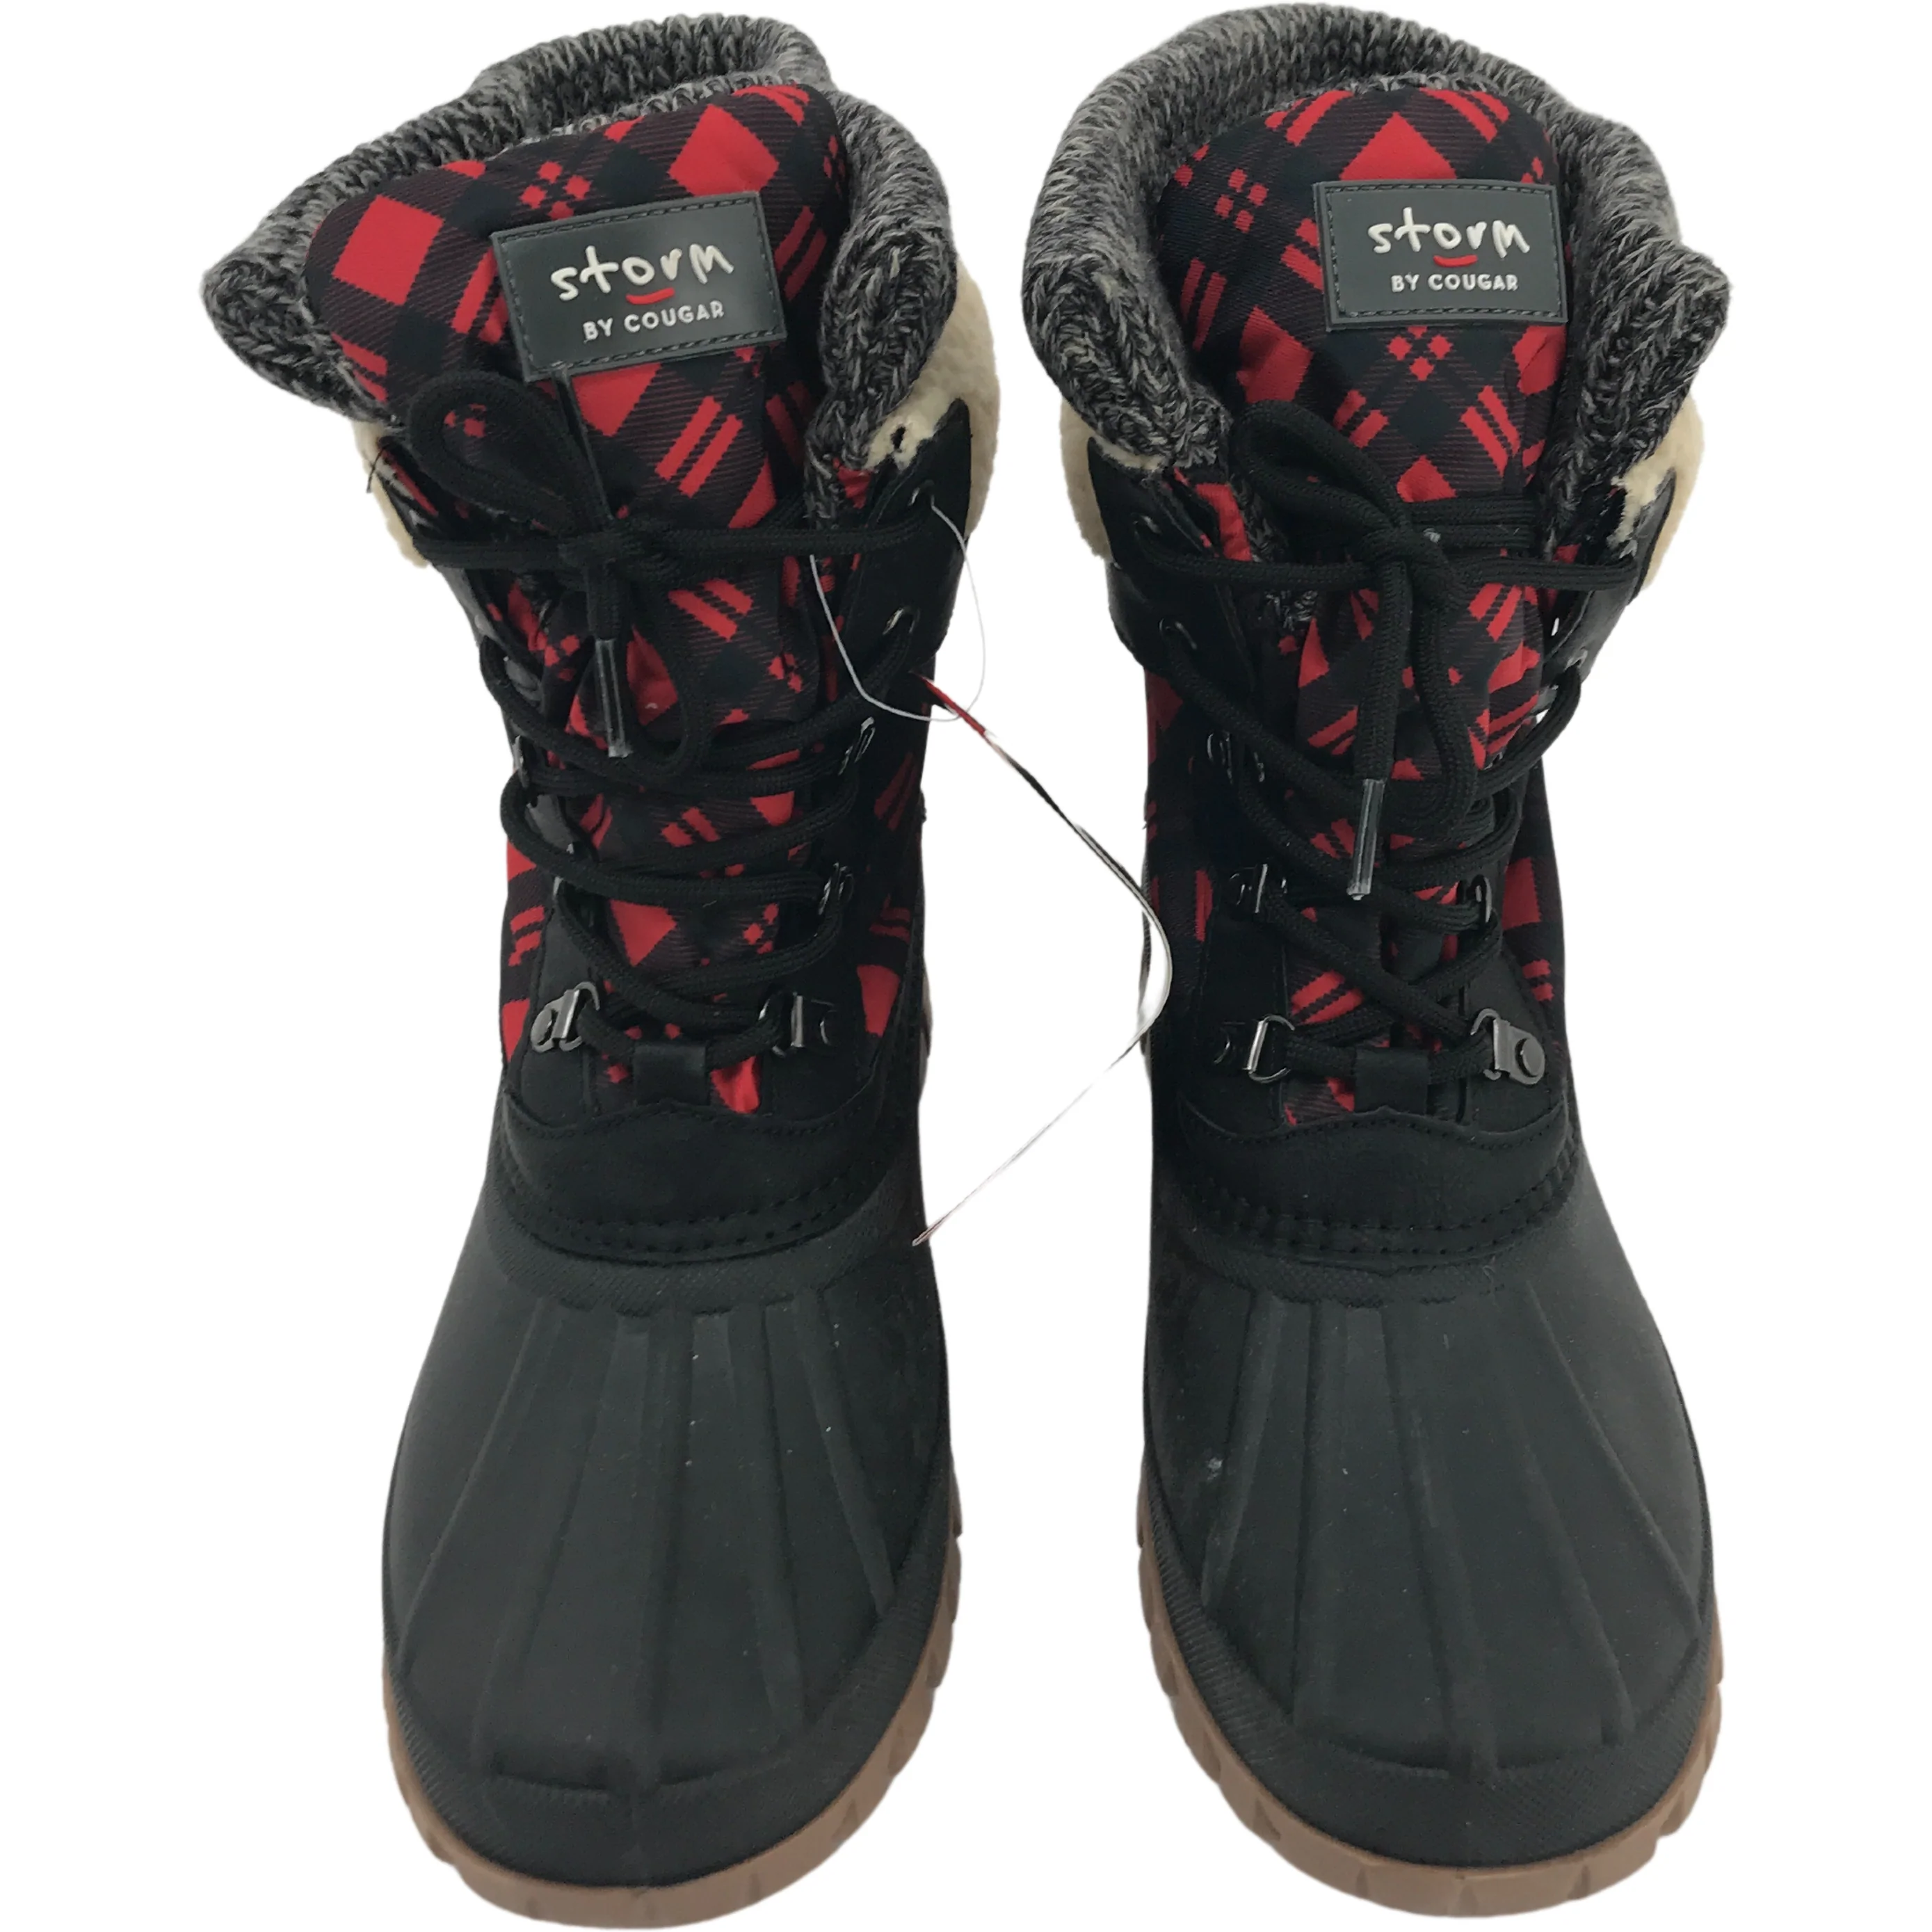 Storm by Cougar Women's Winter Boots / Short Boots / Red Plaid / Lace Up / Various Sizes  **NO TAGS **